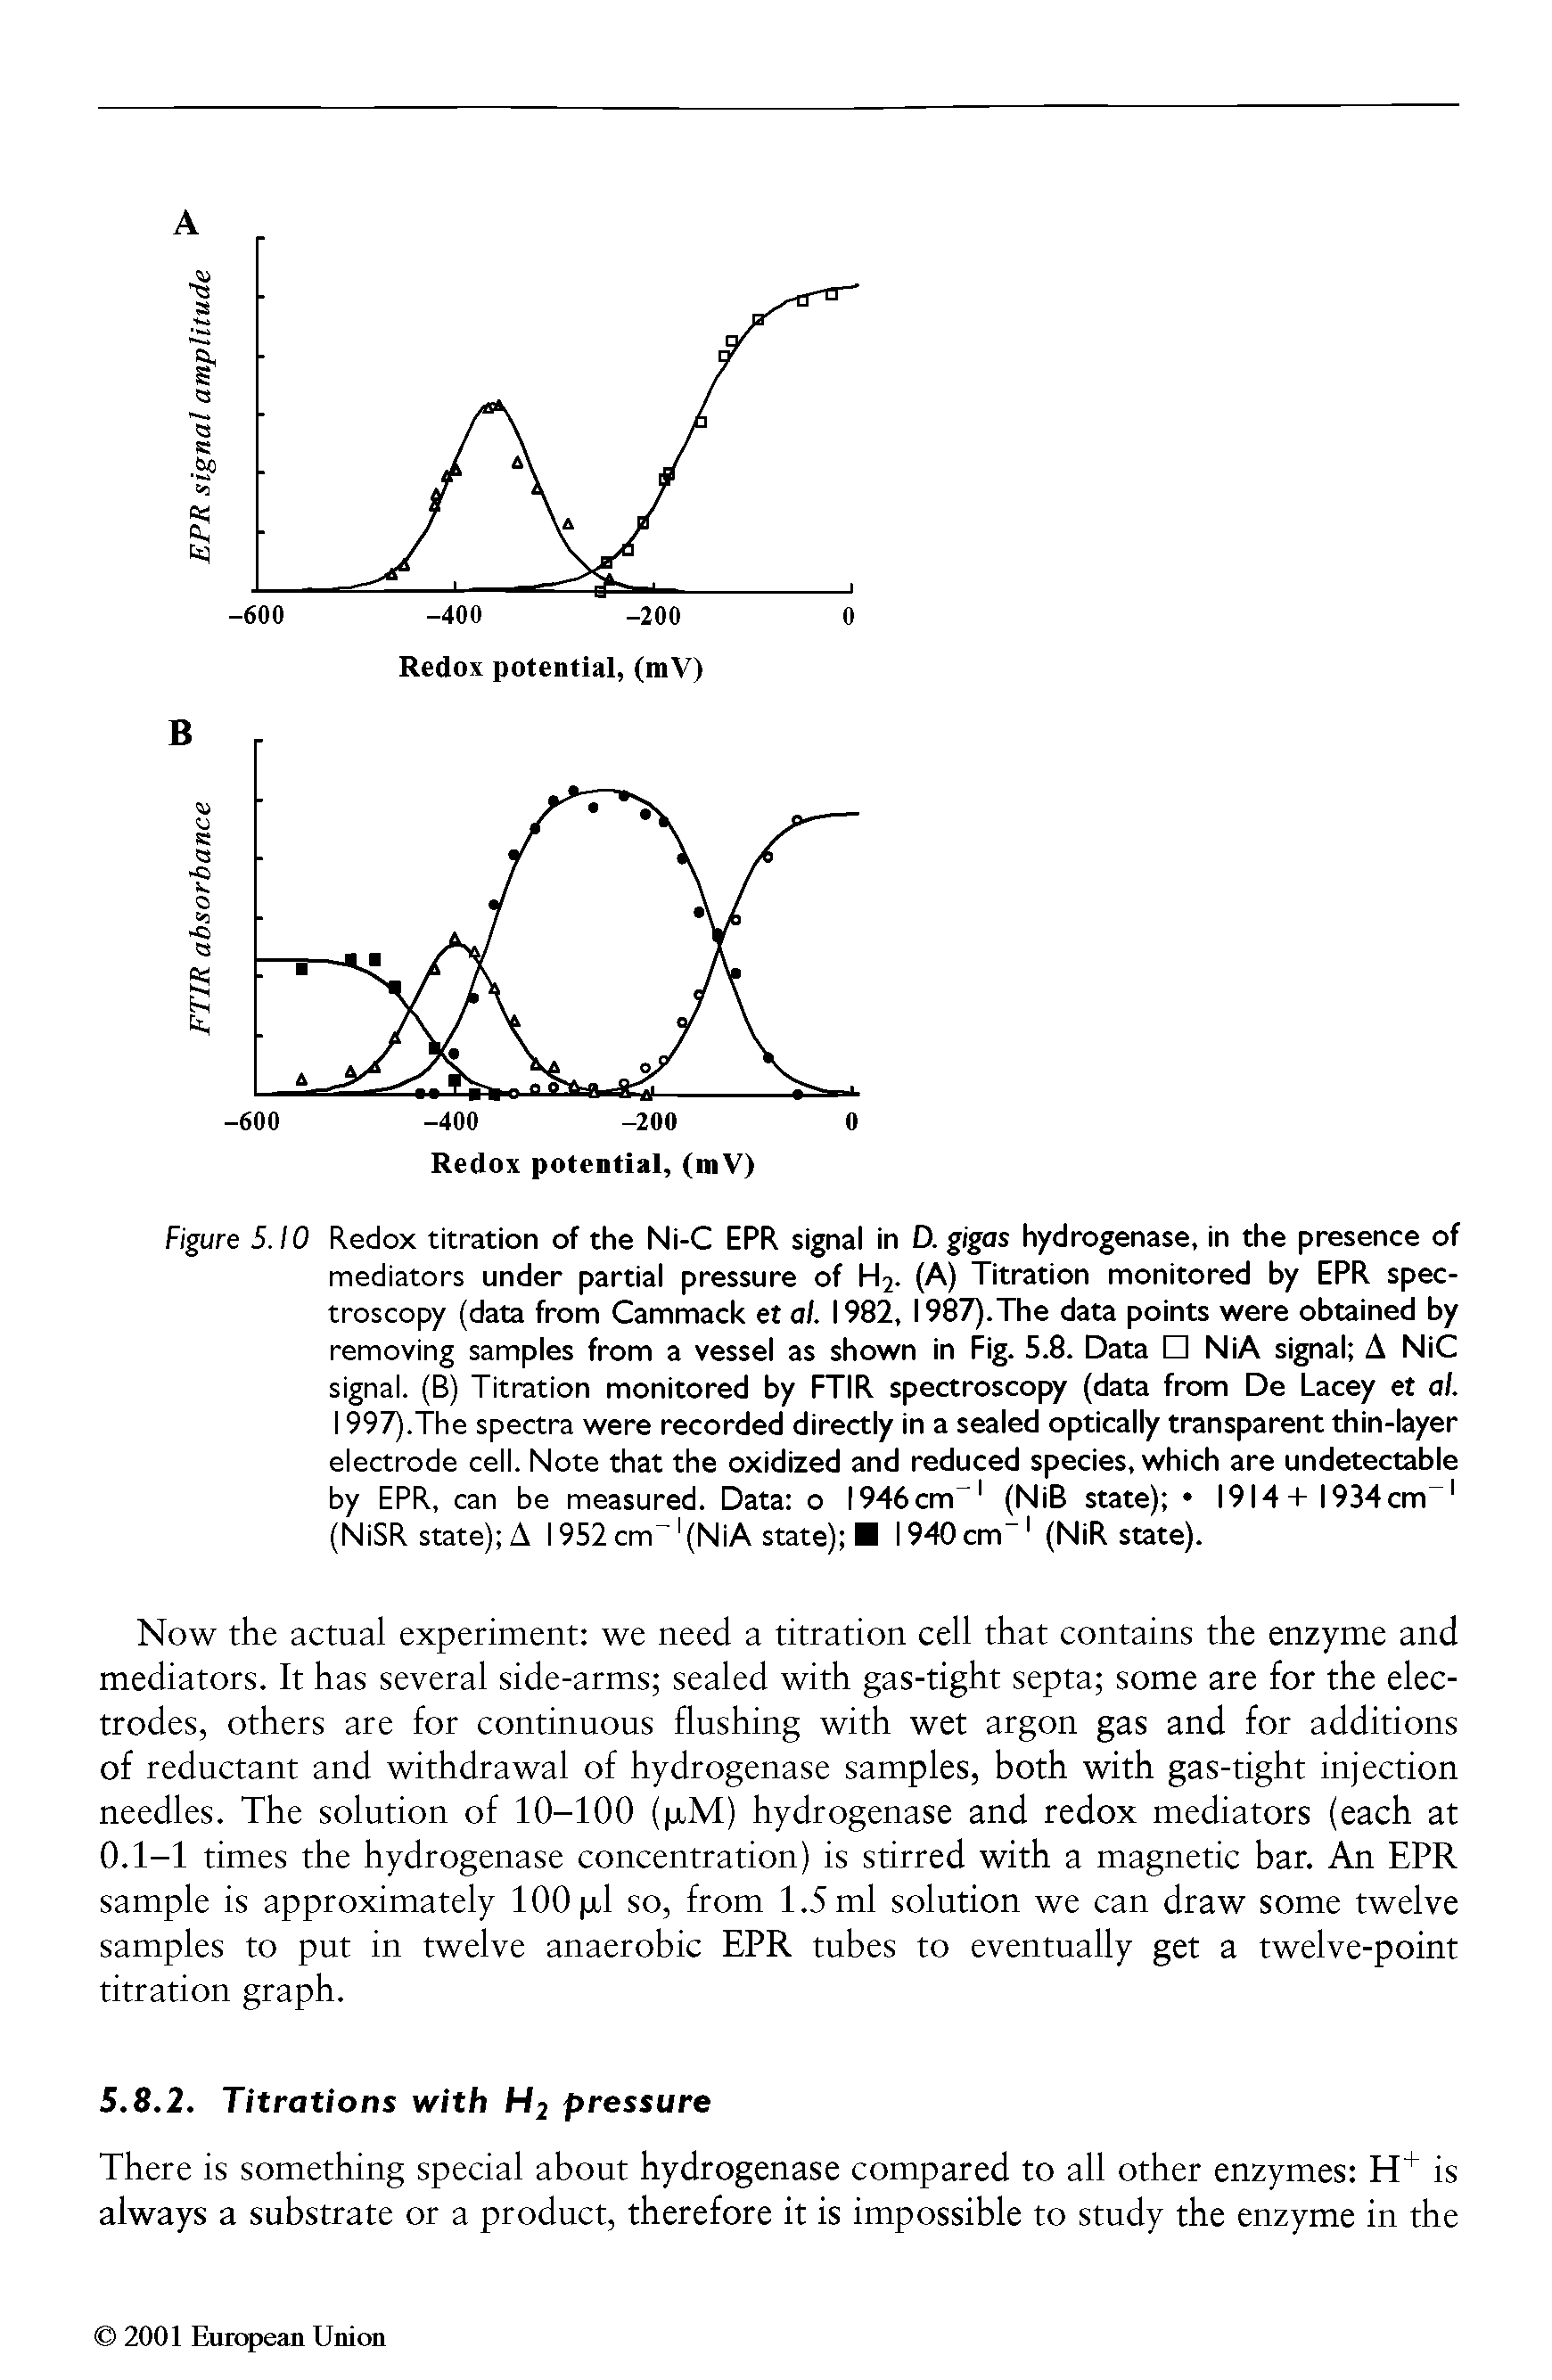 Figure 5.10 Redox titration of the Ni-C EPR signal in D. gigas hydrogenase, in the presence of mediators under partial pressure of H2. (A) Titration monitored by EPR spectroscopy (data from Cammack et al. 1982, 1987).The data points were obtained by removing samples from a vessel as shown in Fig. 5.8. Data NiA signal A NiC signal. (B) Titration monitored by FTIR spectroscopy (data from De Lacey et al. 1997).The spectra were recorded directly in a sealed optically transparent thin-layer electrode cell. Note that the oxidized and reduced species, which are undetectable by EPR, can be measured. Data o I946cm (NiB state) 1914+ 1934cm (NiSR state) A 1952cm (NiA state) 1940cm (NiR state).